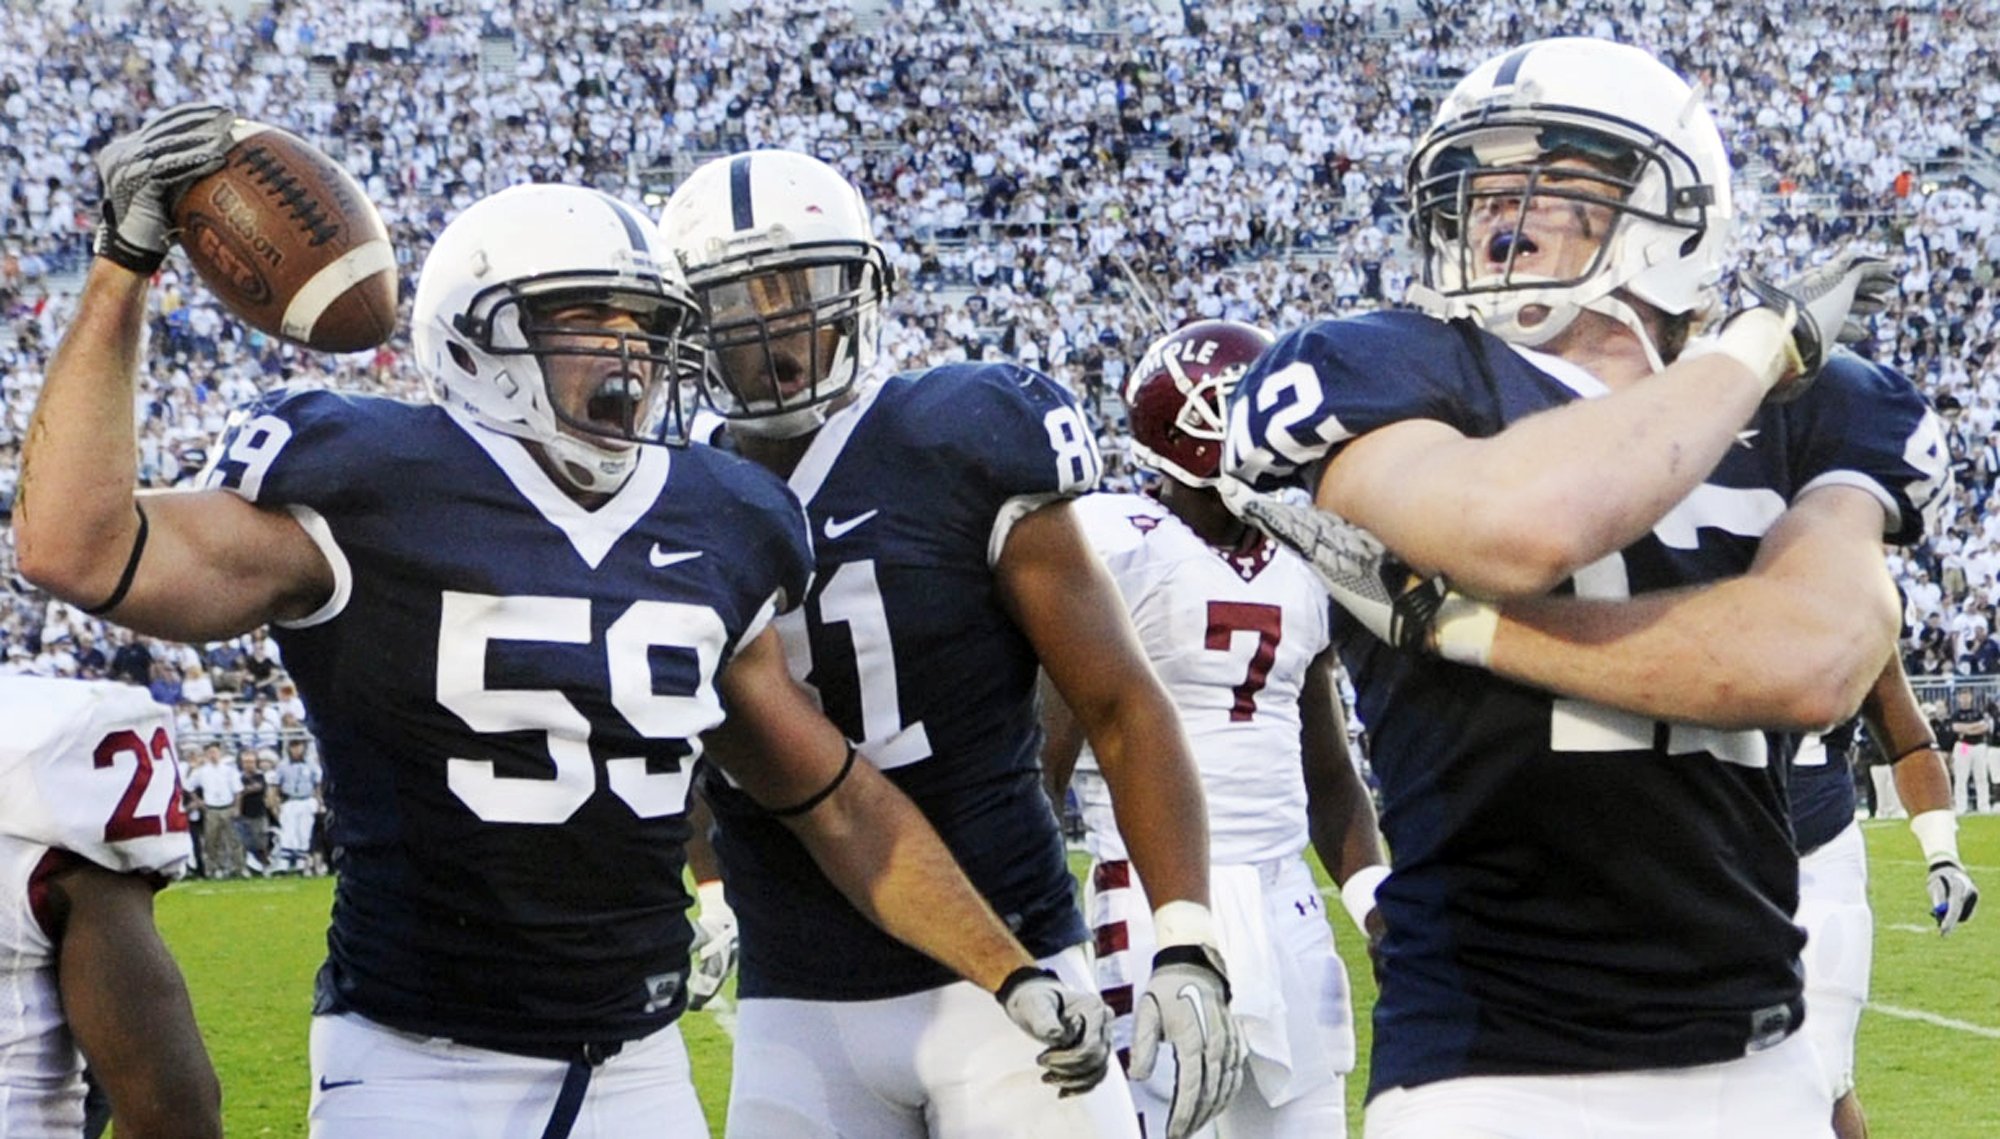 penn, State, Nittany, Lions, College, Football Wallpaper